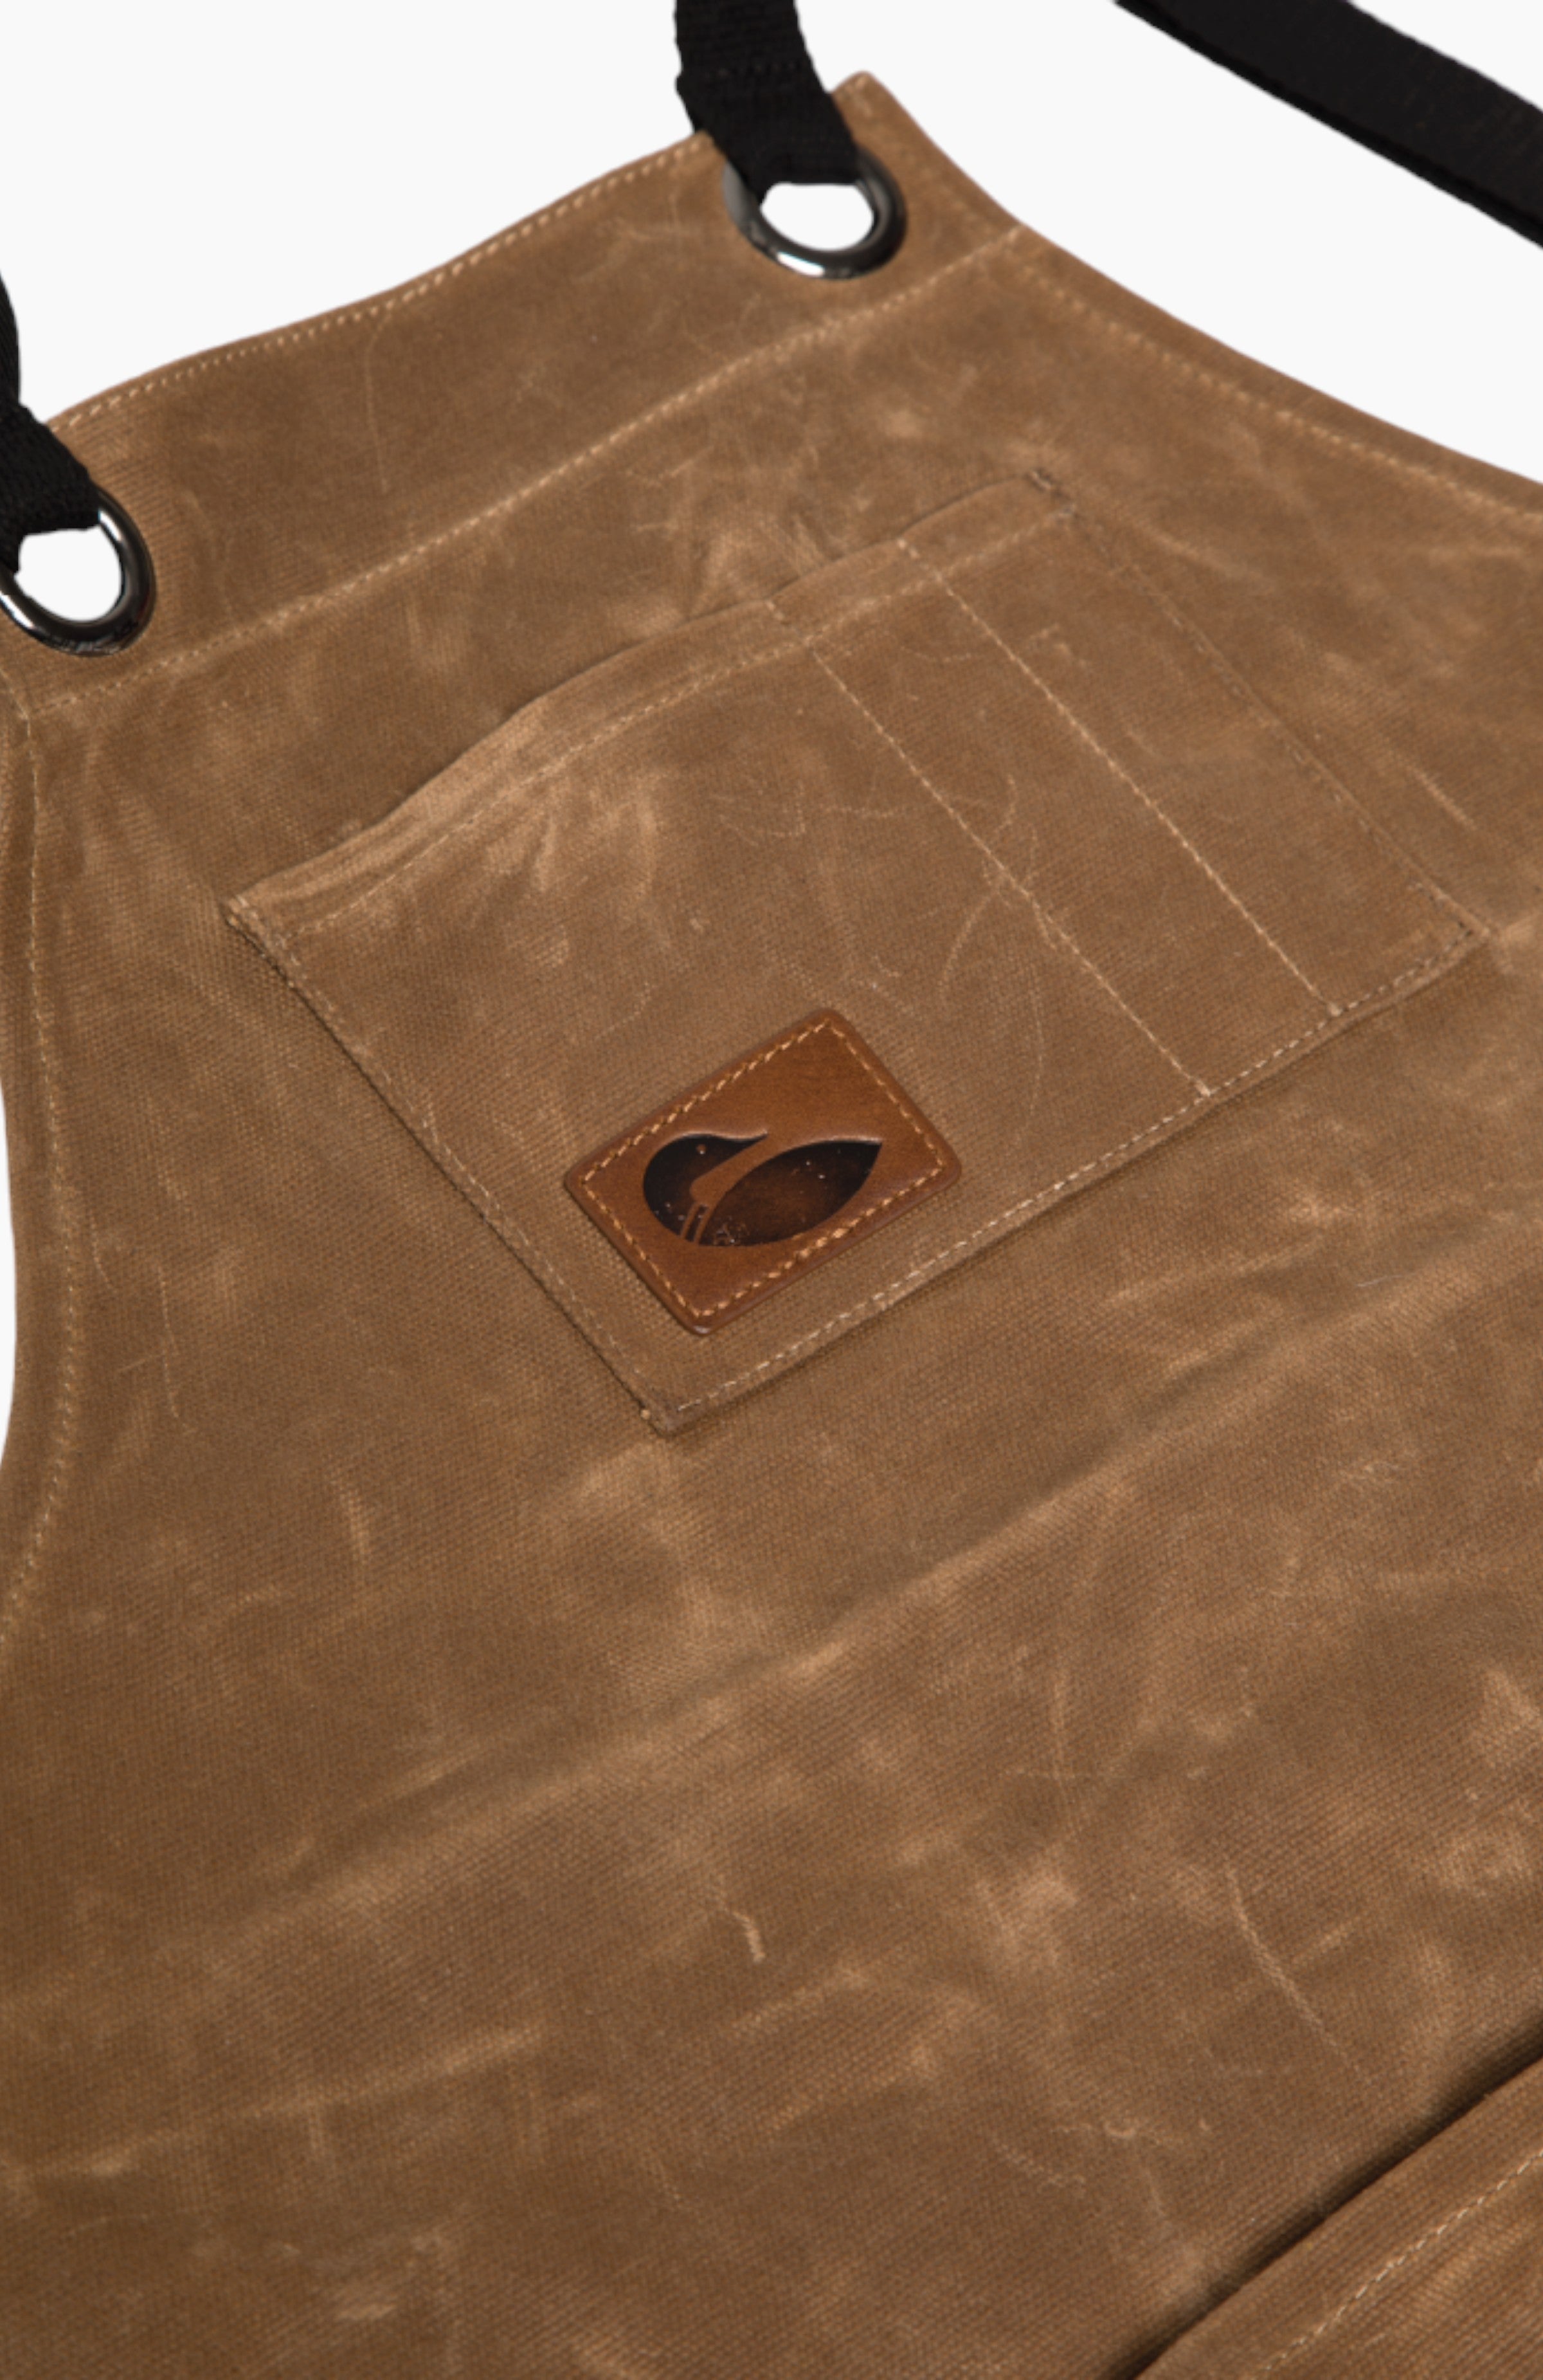 Close up of the brown leather apron chest pocket with a leather paddle north logo badge.